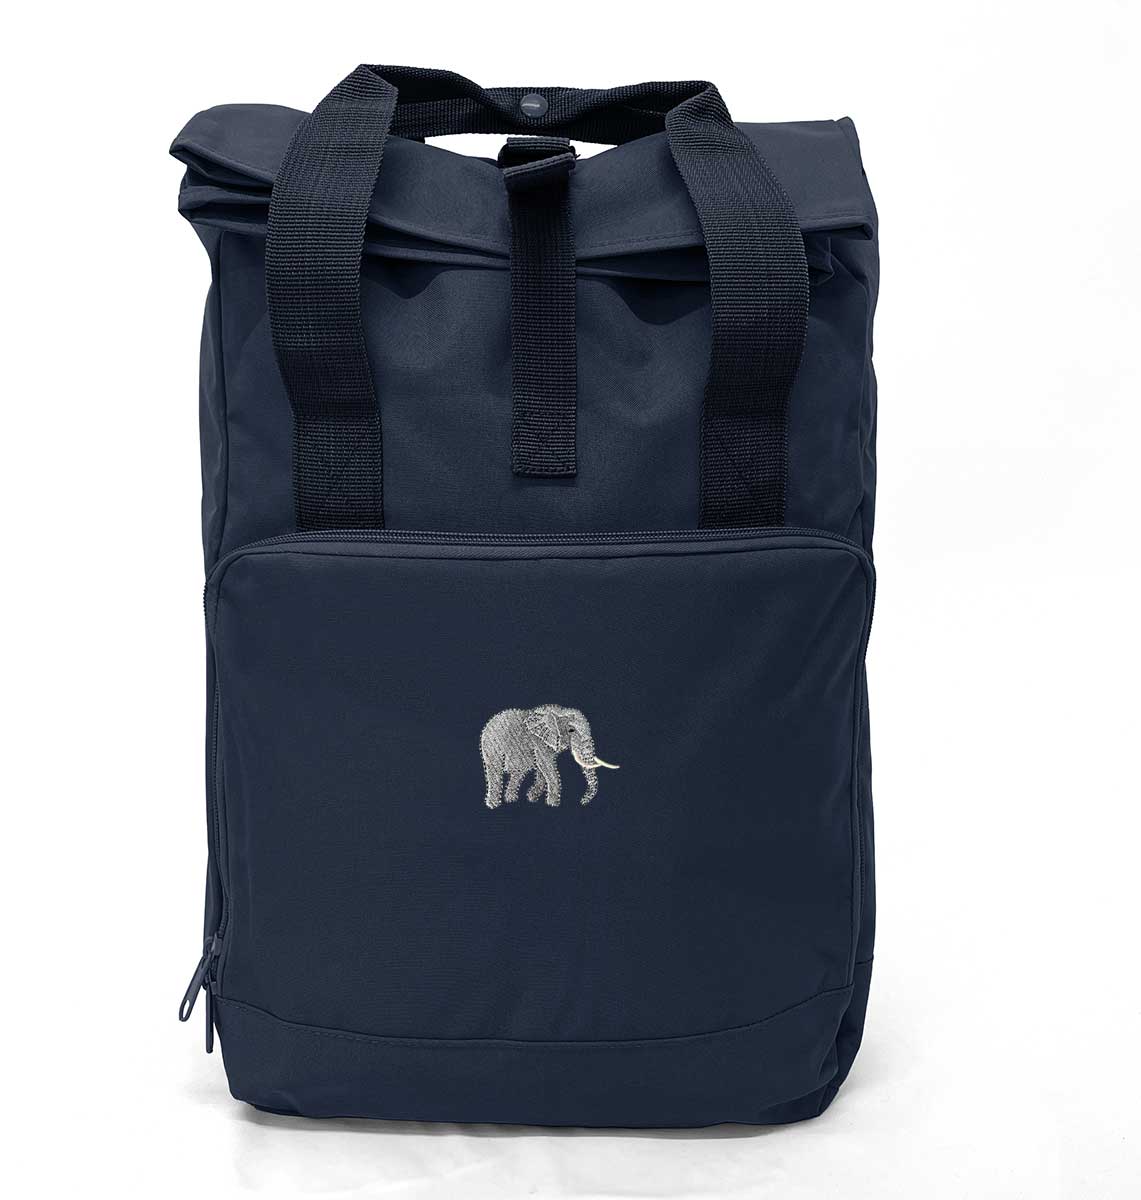 Elephant Large Roll-top Laptop Recycled Backpack - Blue Panda